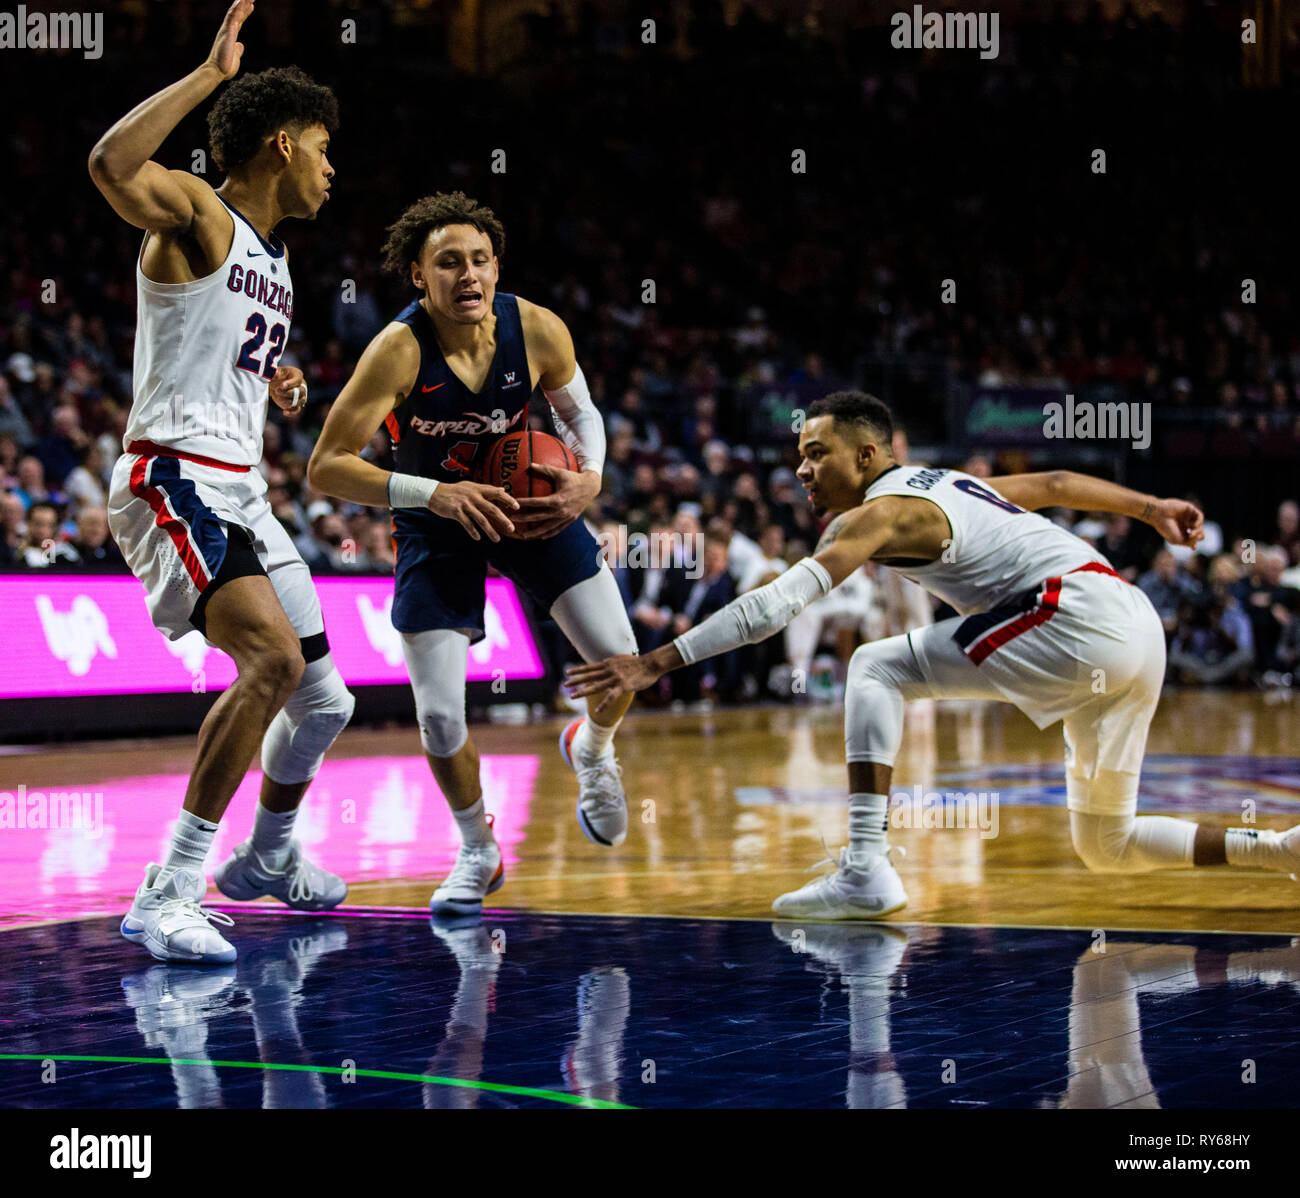 Mar 11 2019 Las Vegas, NV, U.S.A. Pepperdine guard Colbey Ross (4) drives to the basket during the NCAA West Coast Conference Men's Basketball Tournament semi -final between the Pepperdine Wave and the Gonzaga Bulldogs 74-100 lost at Orleans Arena Las Vegas, NV. Thurman James/CSM Stock Photo